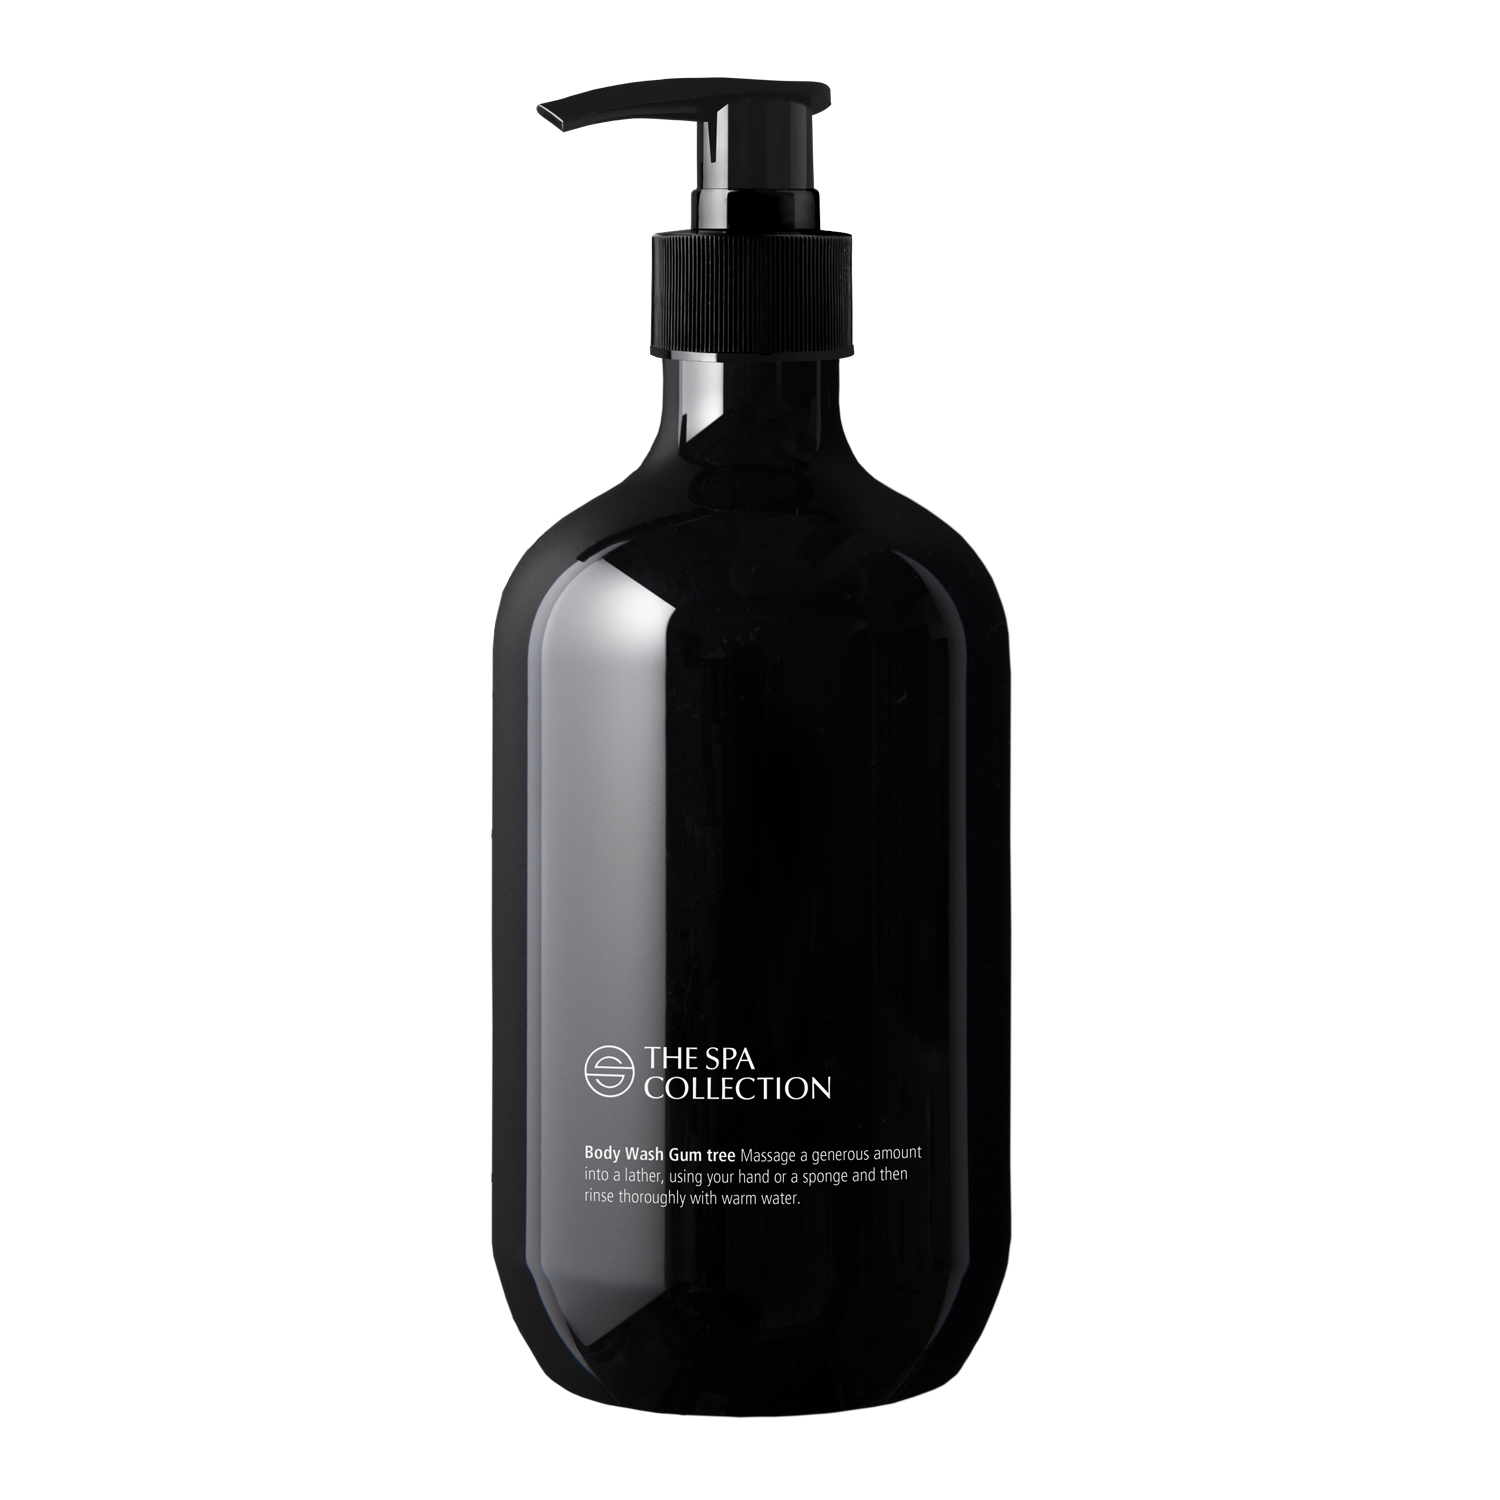 Modern black bottle of eco-friendly gum tree scented body wash with 475ml and pump by The Spa Collection